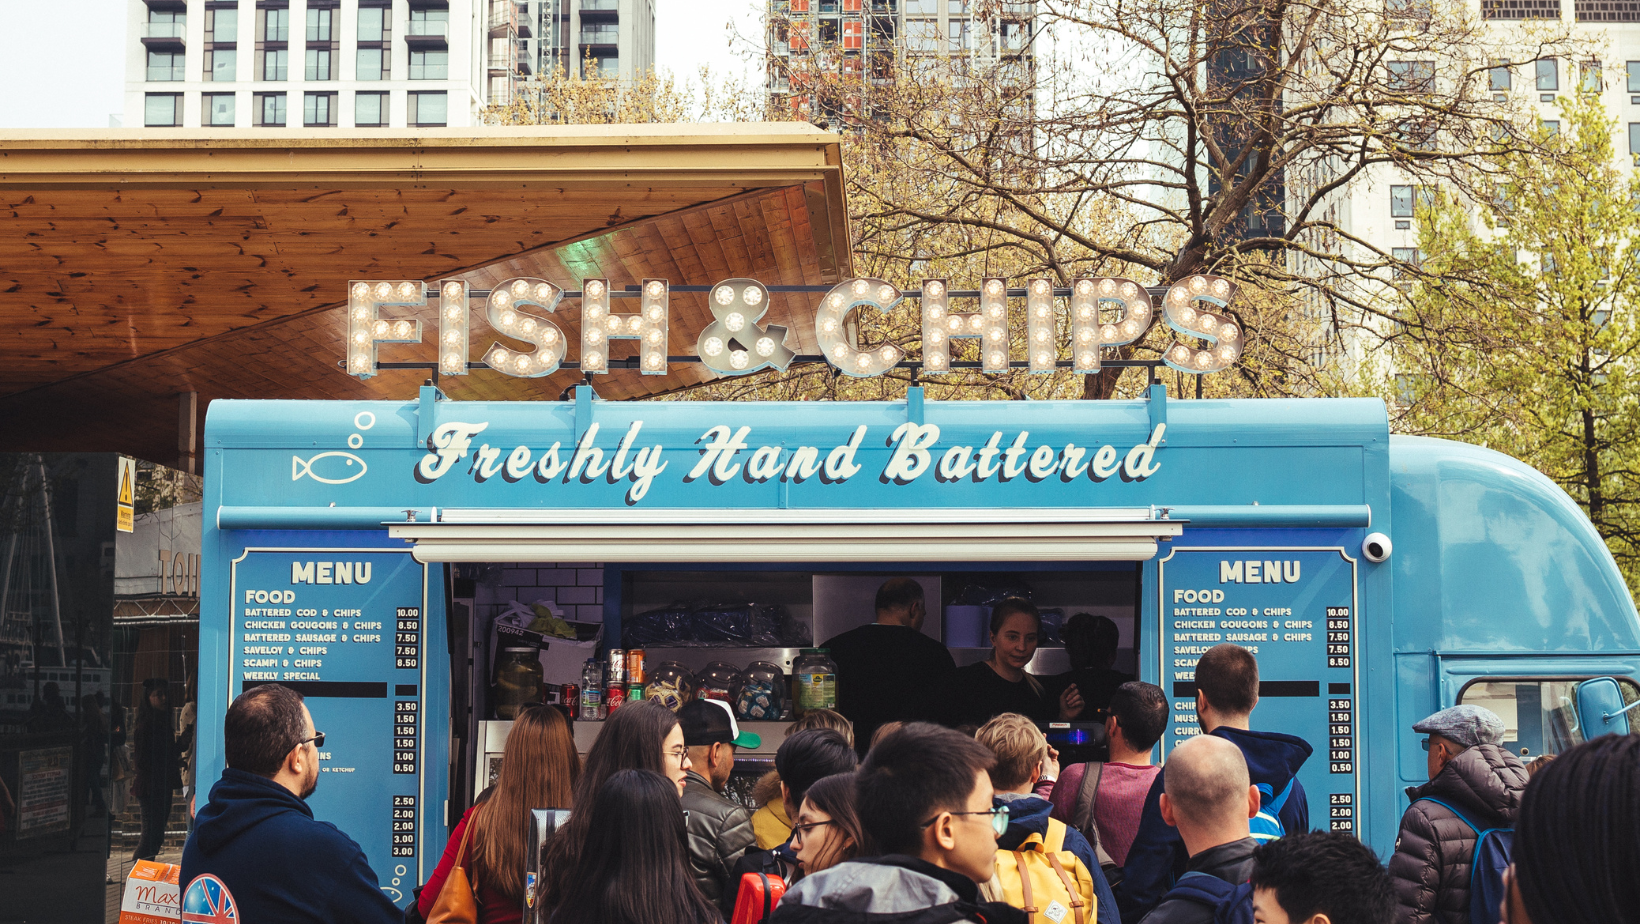 Food truck serving fish and chips. 